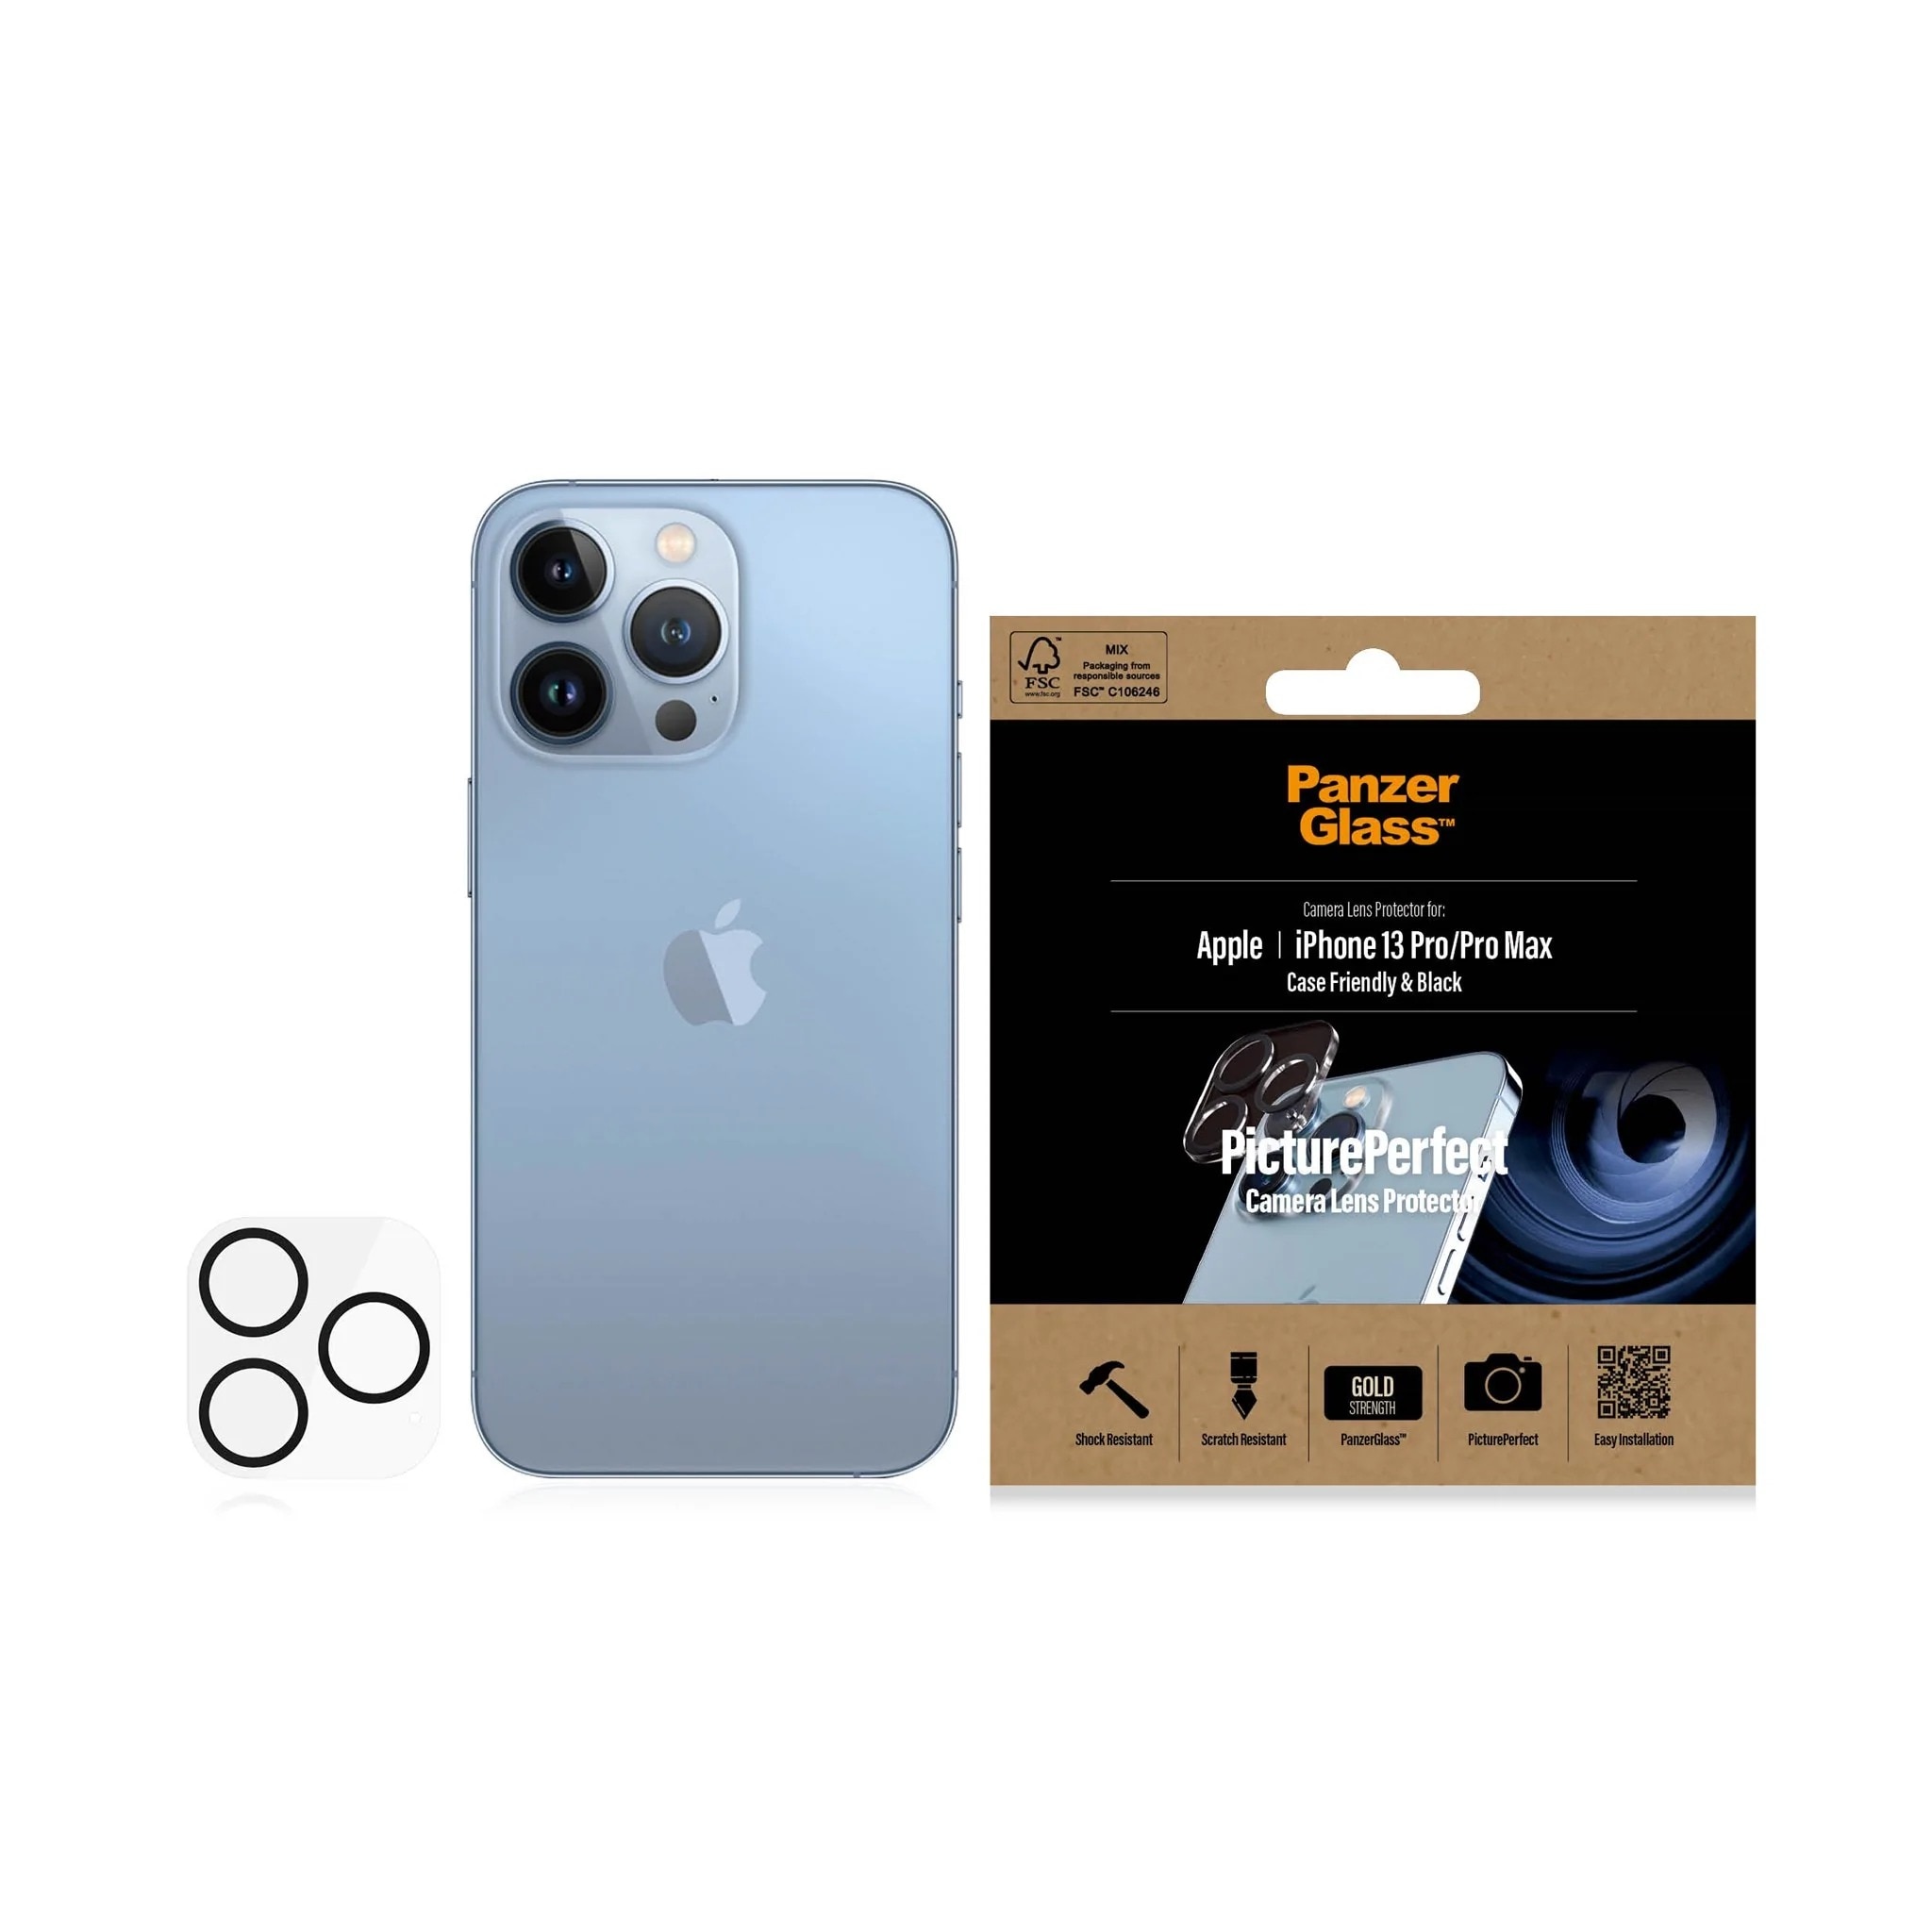 iPhone 13 Pro Max Camera Lens Protector PicturePerfect